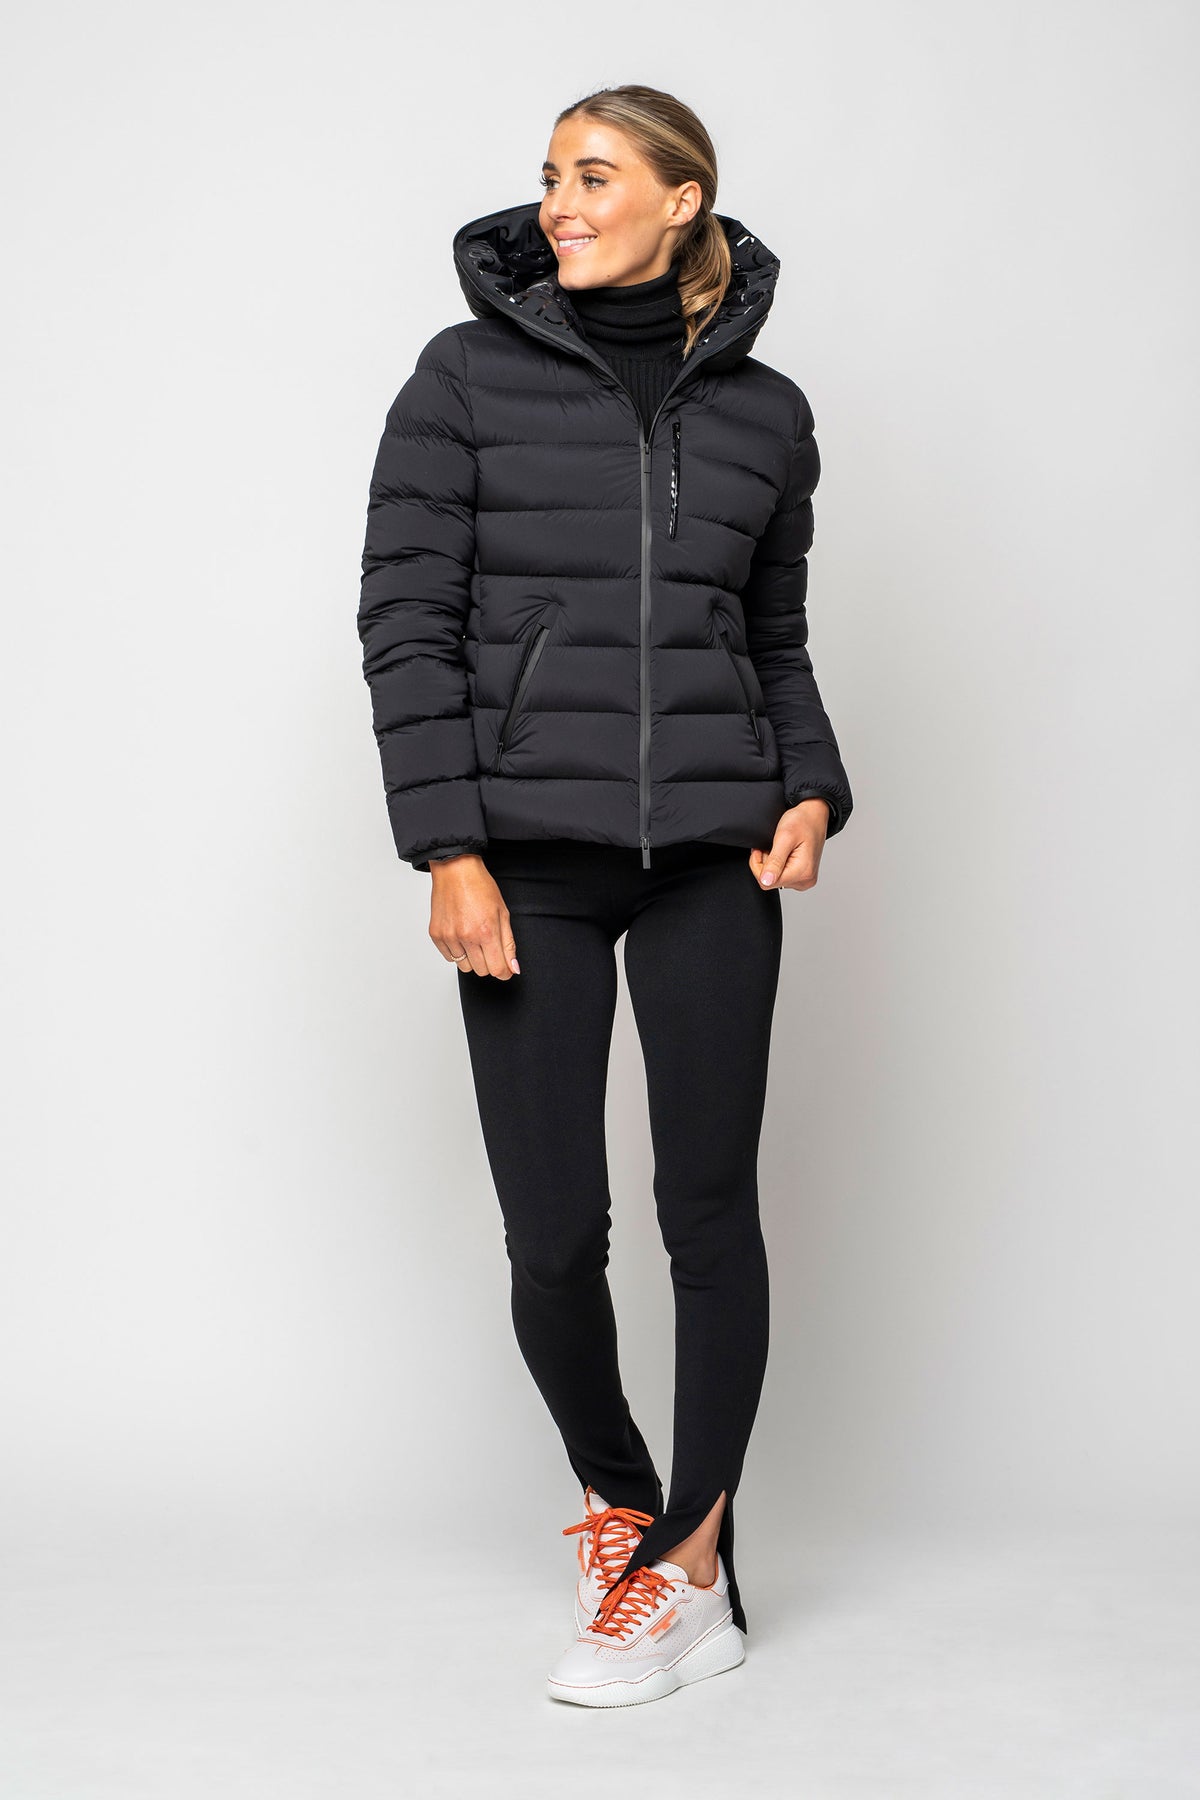 Moncler Matte Black Herbe Fitted Puffer Jacket With Hood